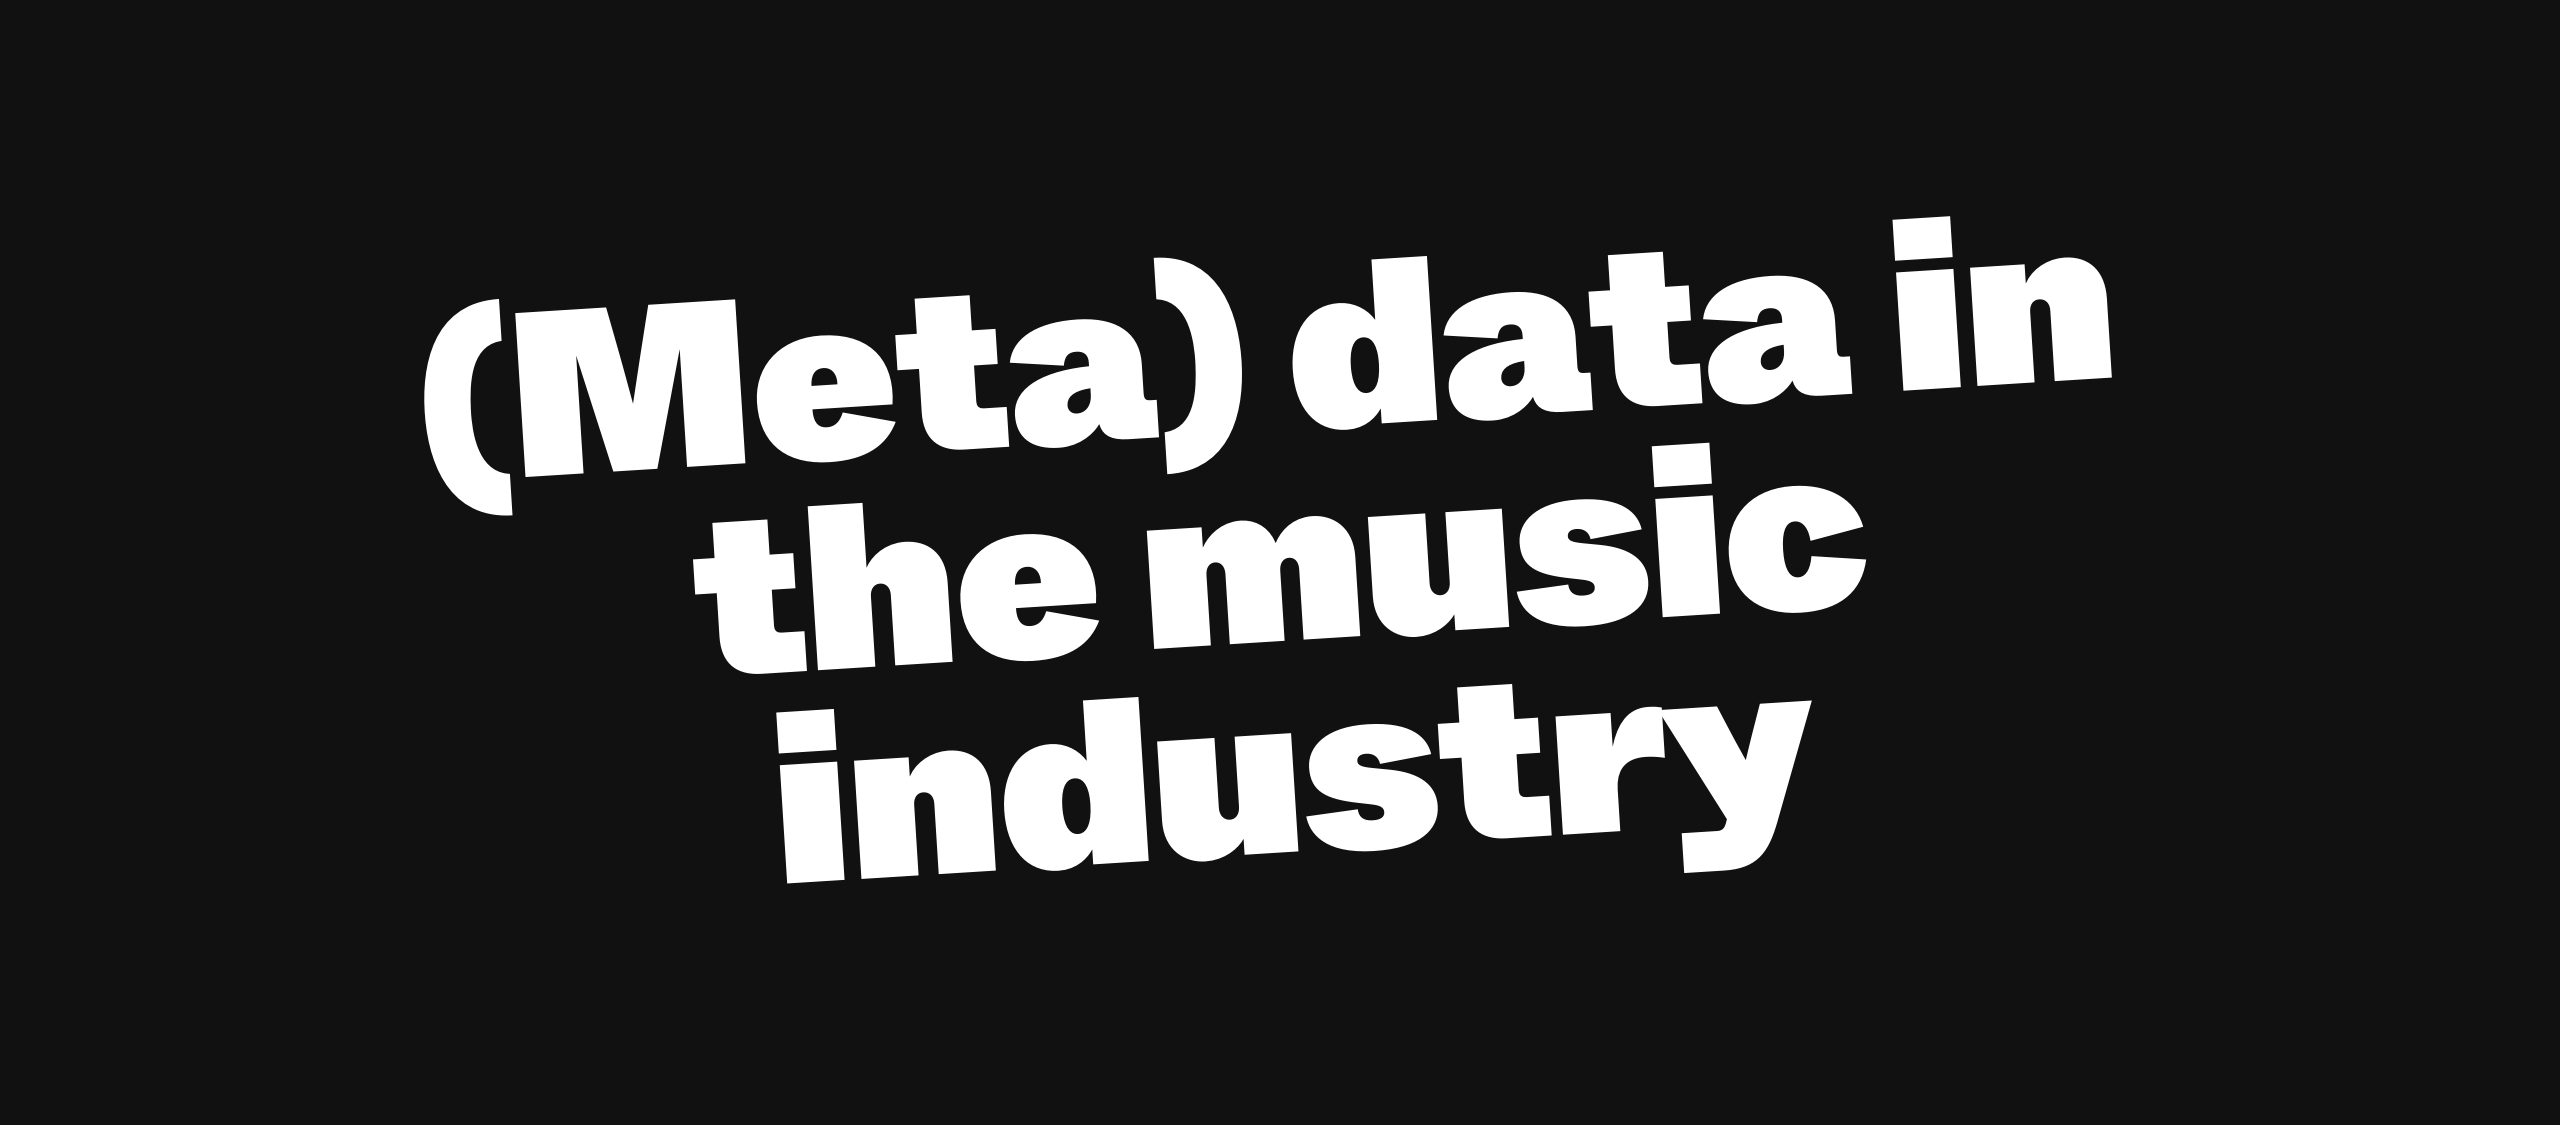 (Meta) data in the music industry